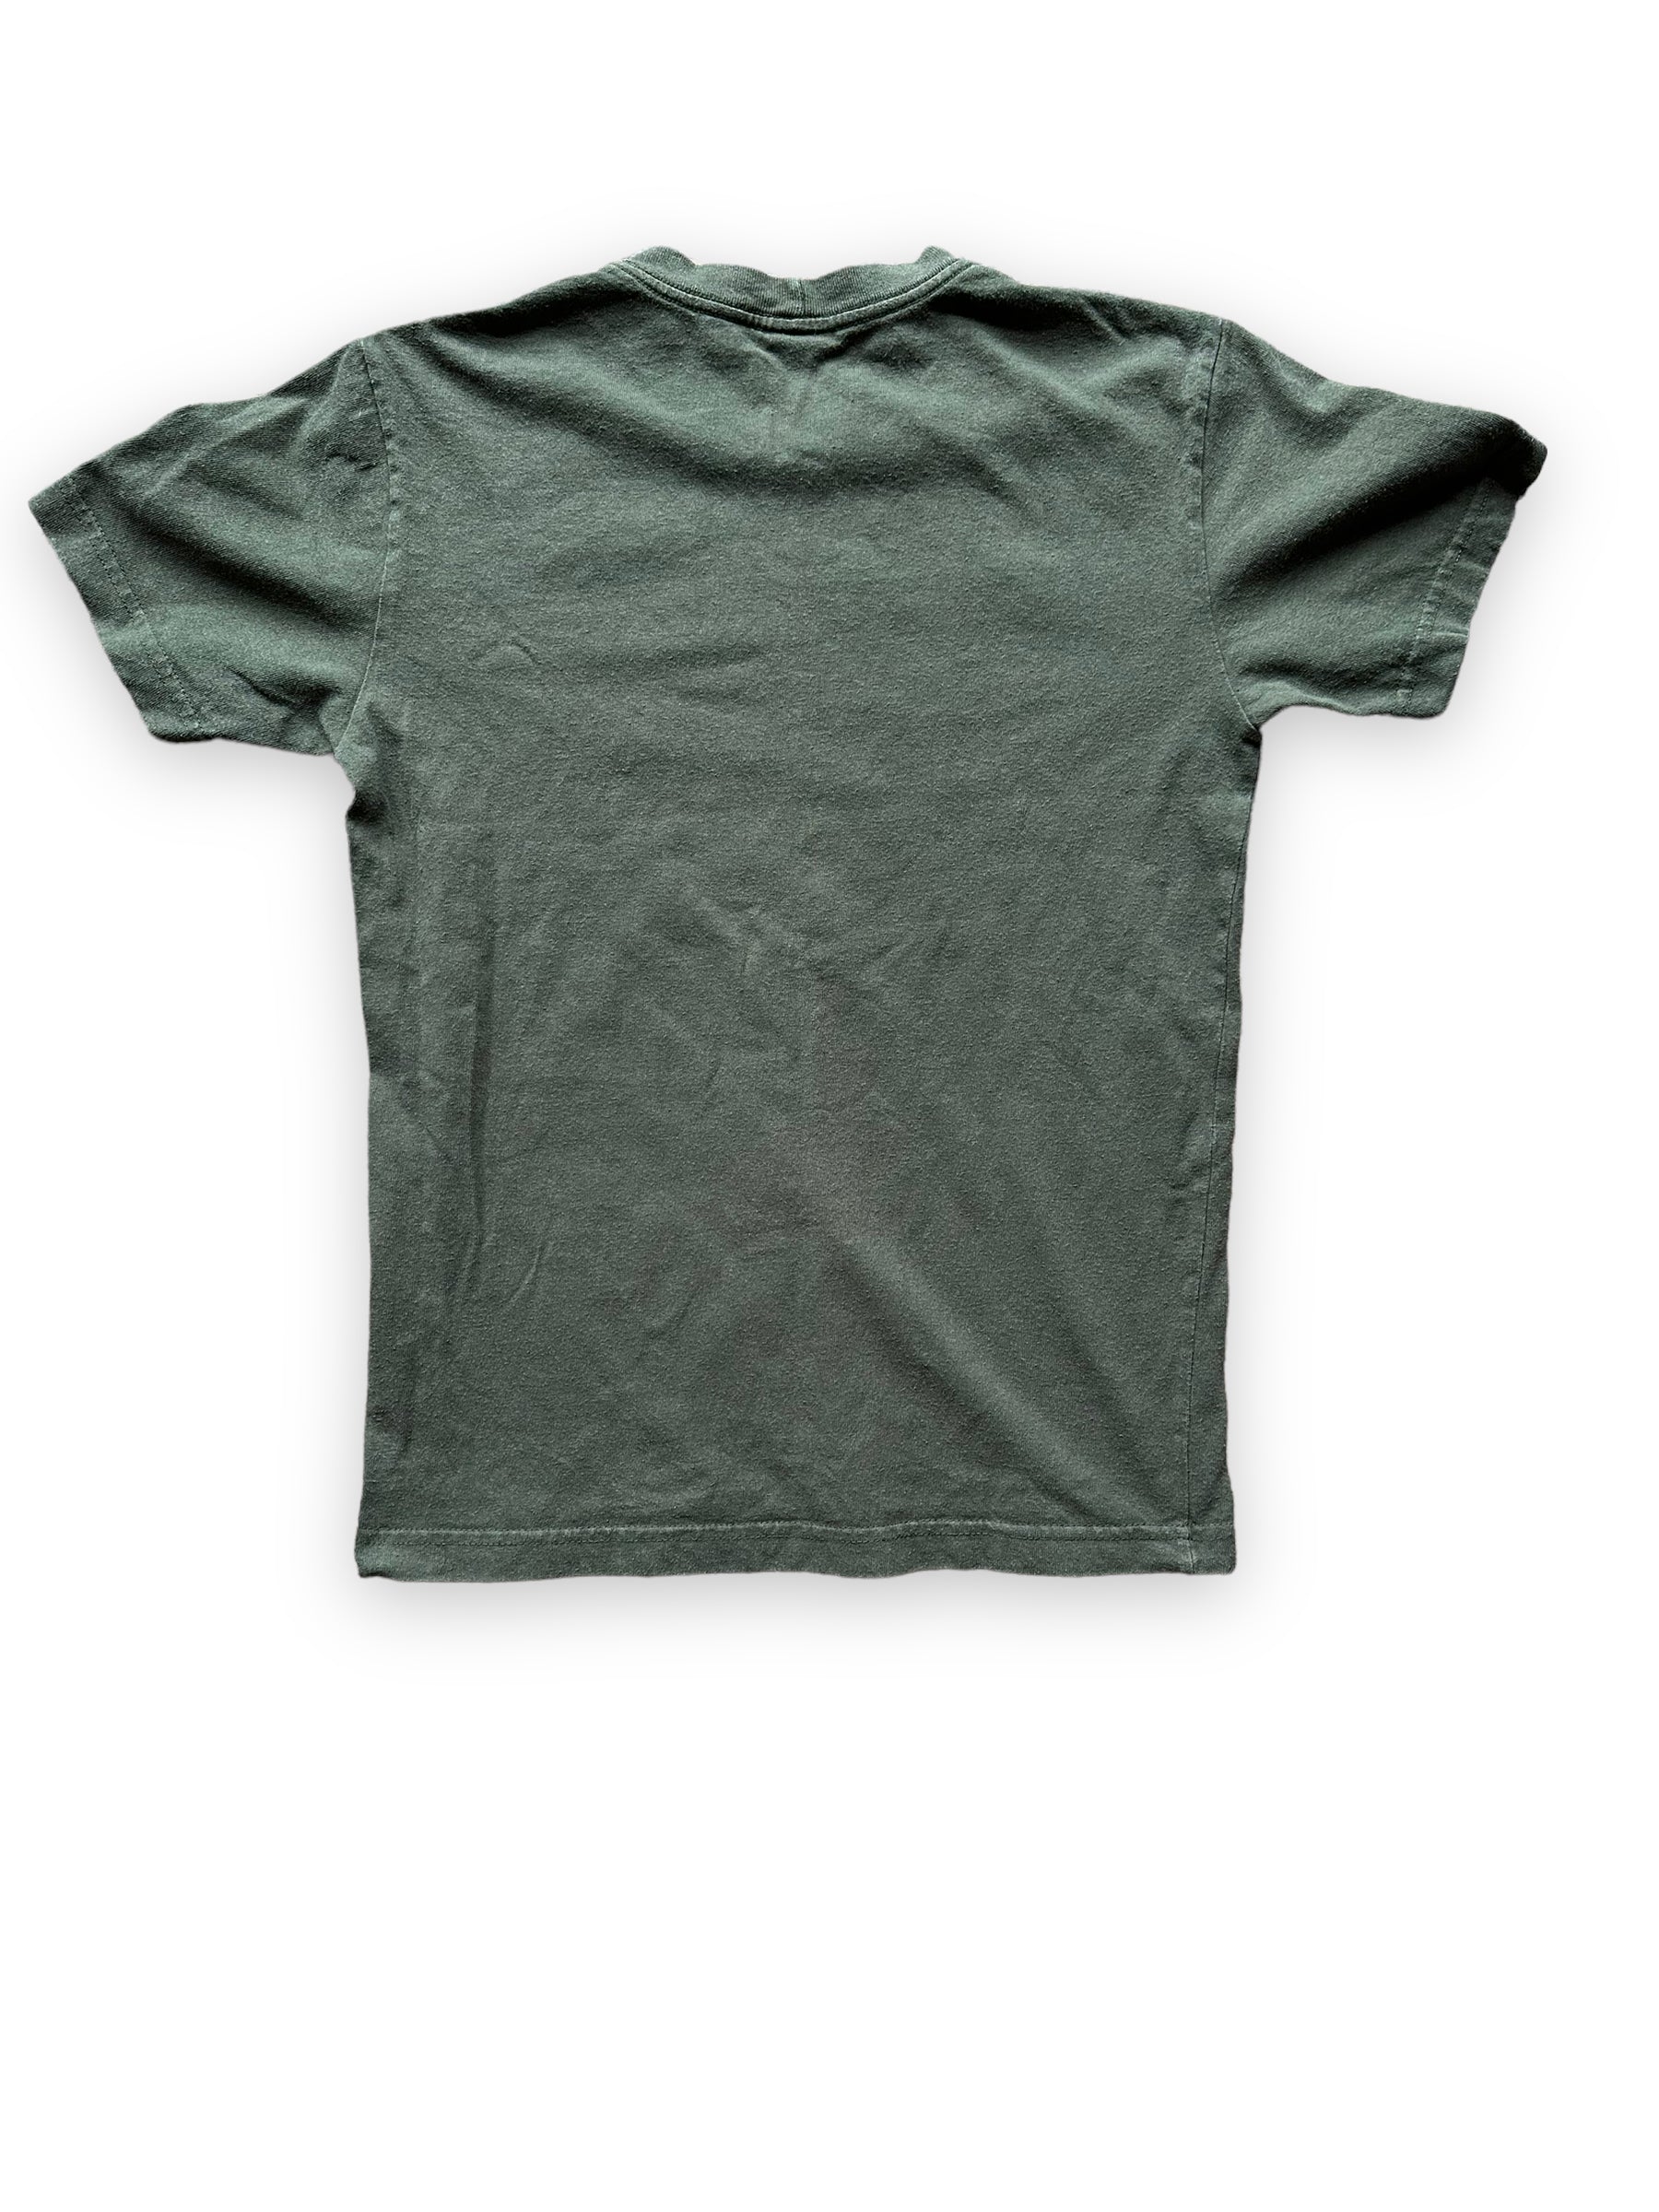 Rear View of Olive Green Filson Cotton Tee SZ XS  |  Barn Owl Vintage Goods | Filson Graphic Tees Seattle